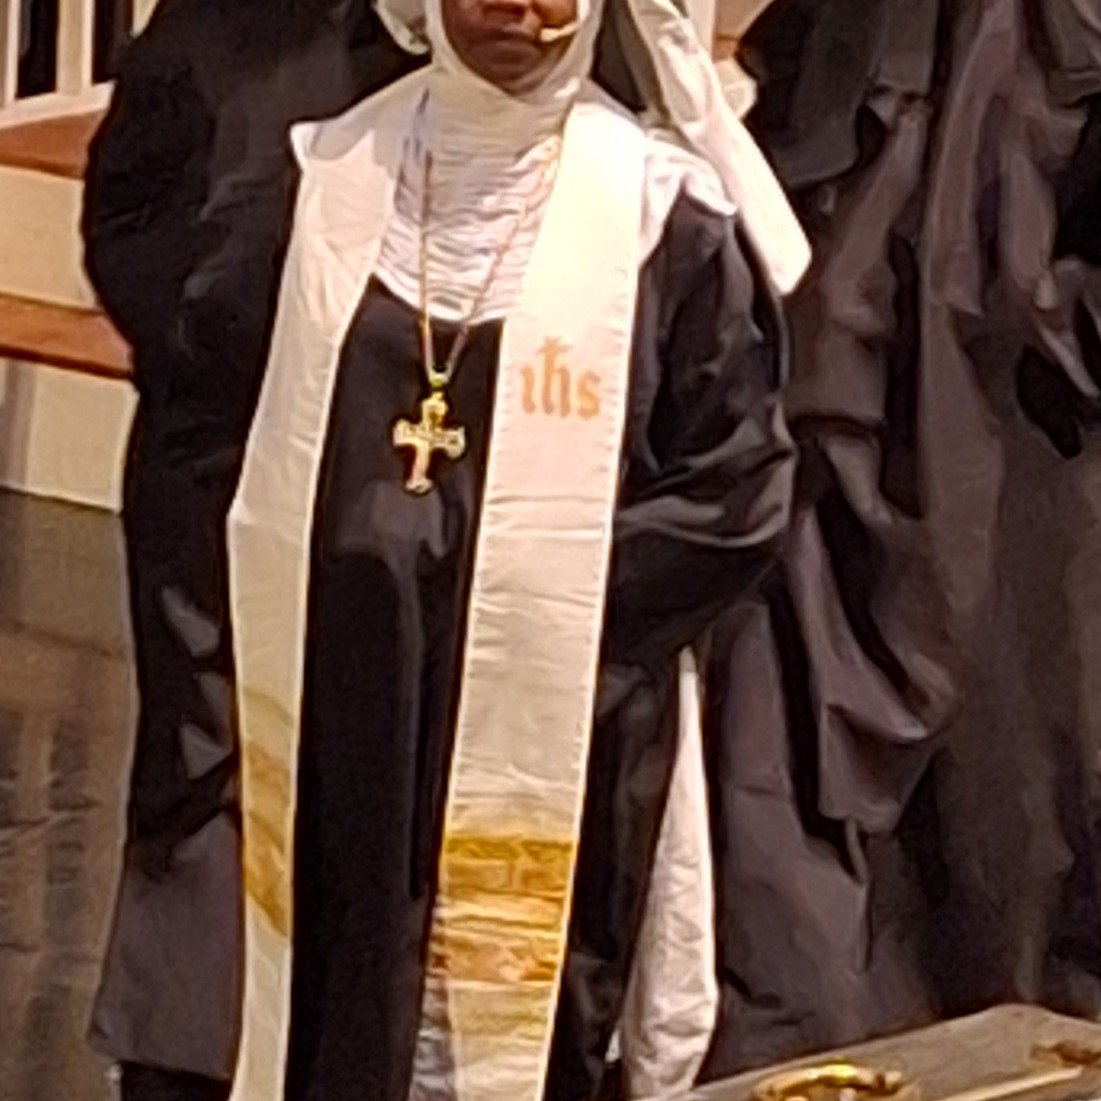 I received this photo from a client who is currently a chaplain in Kenya. He wrote --

I wanted to share a fun picture with you that I took last night. The picture is one of my students wearing the stole that you made for my ordination. She is wearin